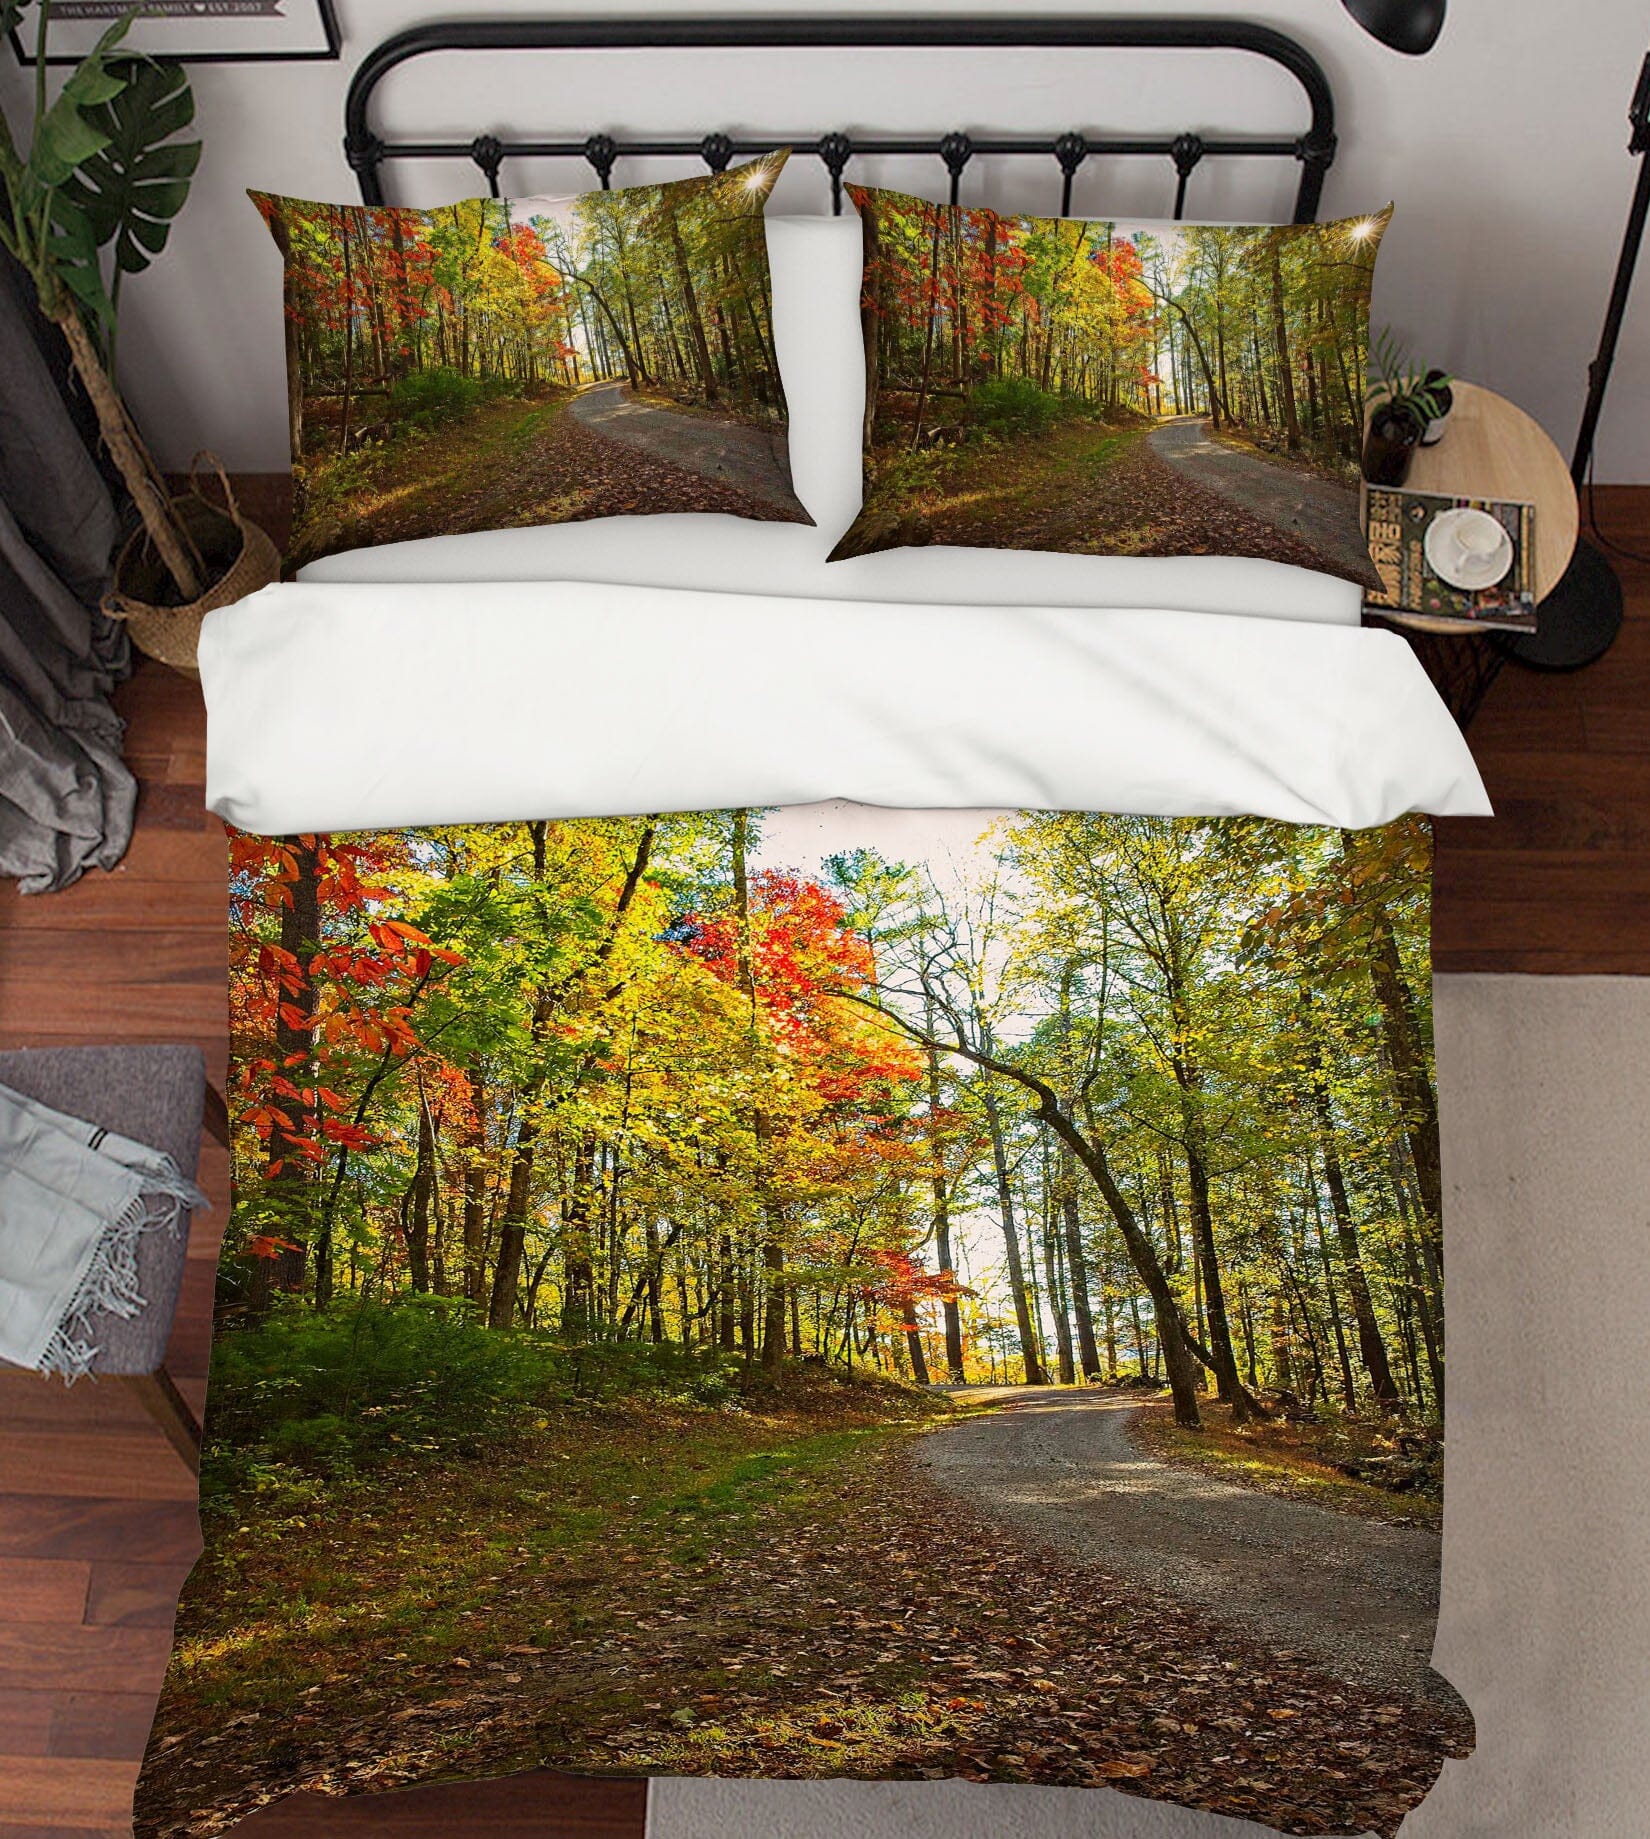 3D Forest Path 2120 Kathy Barefield Bedding Bed Pillowcases Quilt Quiet Covers AJ Creativity Home 